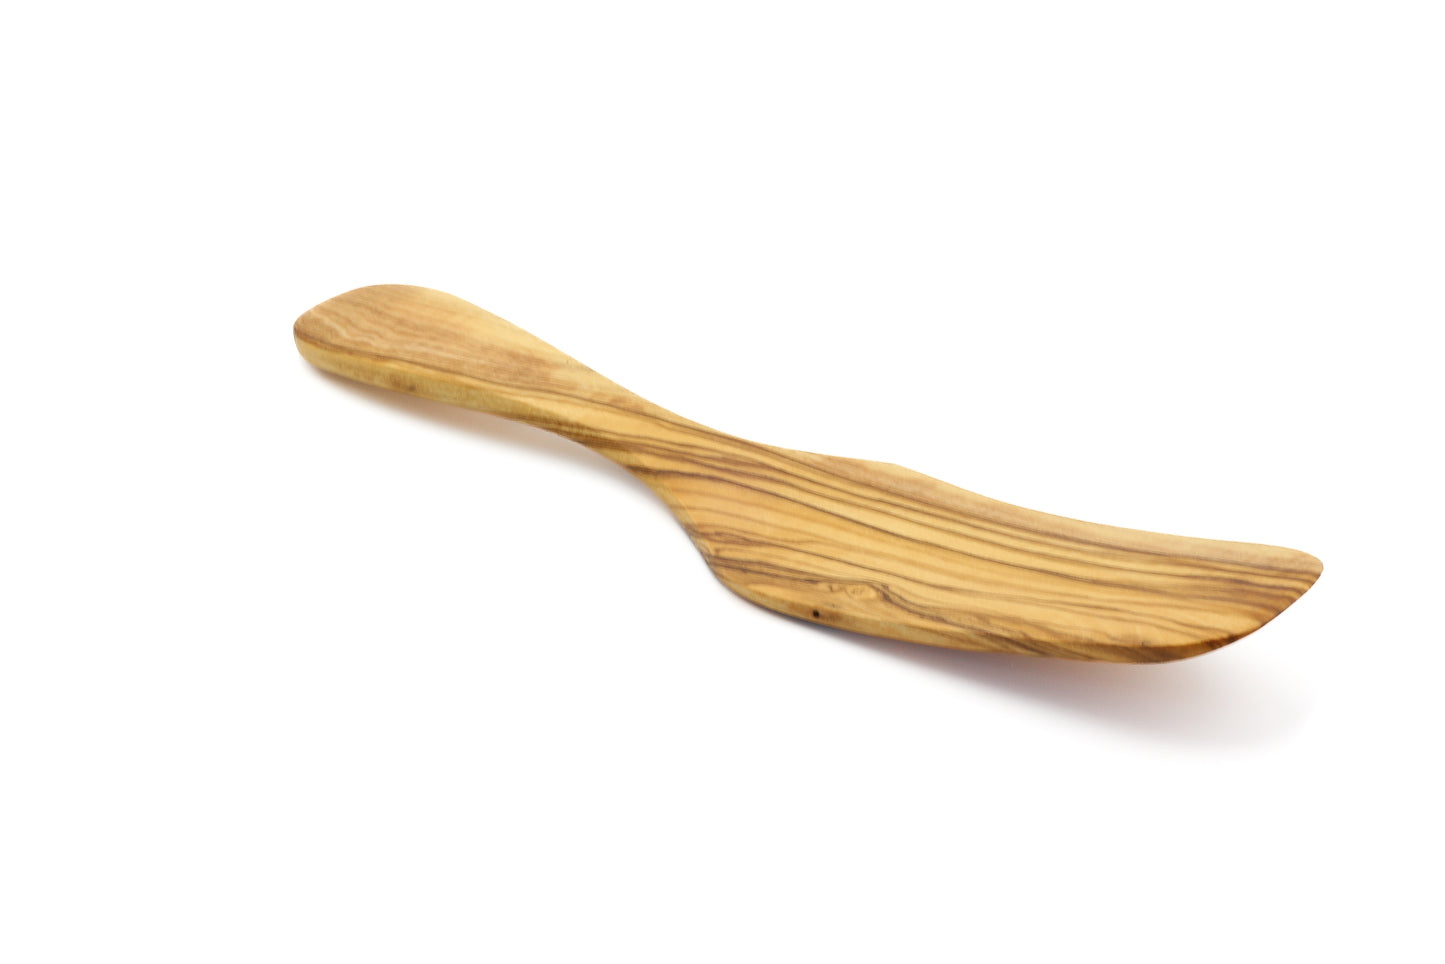 Olive wood pan flipper with a beautifully curved handle